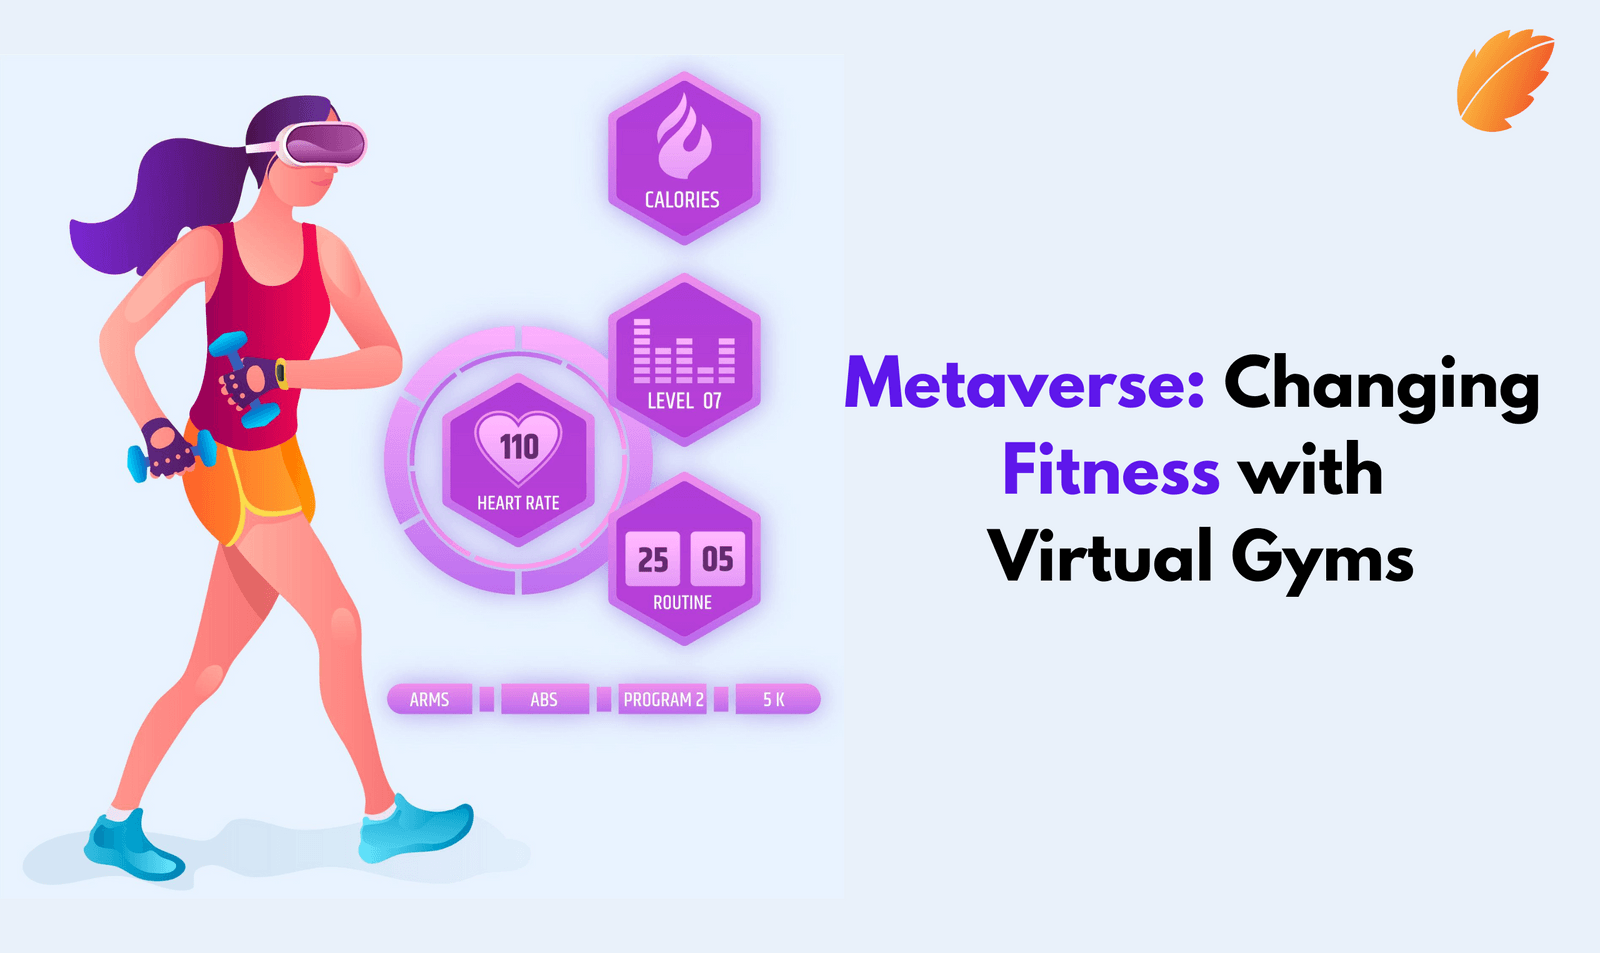 Metaverse: Changing Fitness with Virtual Gyms